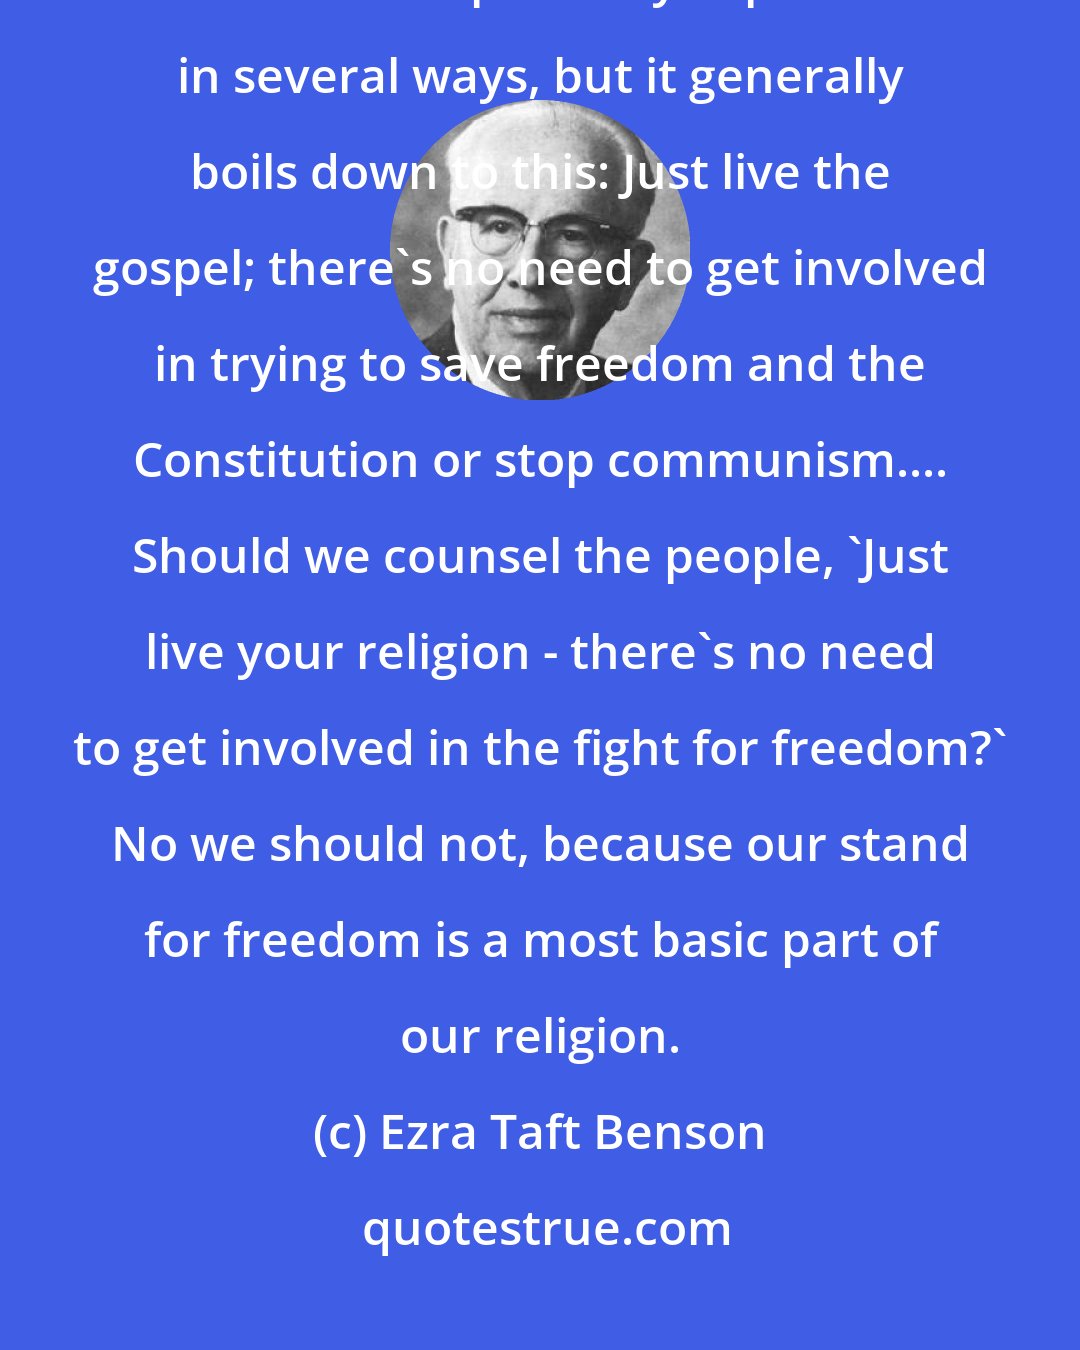 Ezra Taft Benson: There are some who apparently feel that the fight for freedom is separate from the Gospel. They express it in several ways, but it generally boils down to this: Just live the gospel; there's no need to get involved in trying to save freedom and the Constitution or stop communism.... Should we counsel the people, 'Just live your religion - there's no need to get involved in the fight for freedom?' No we should not, because our stand for freedom is a most basic part of our religion.